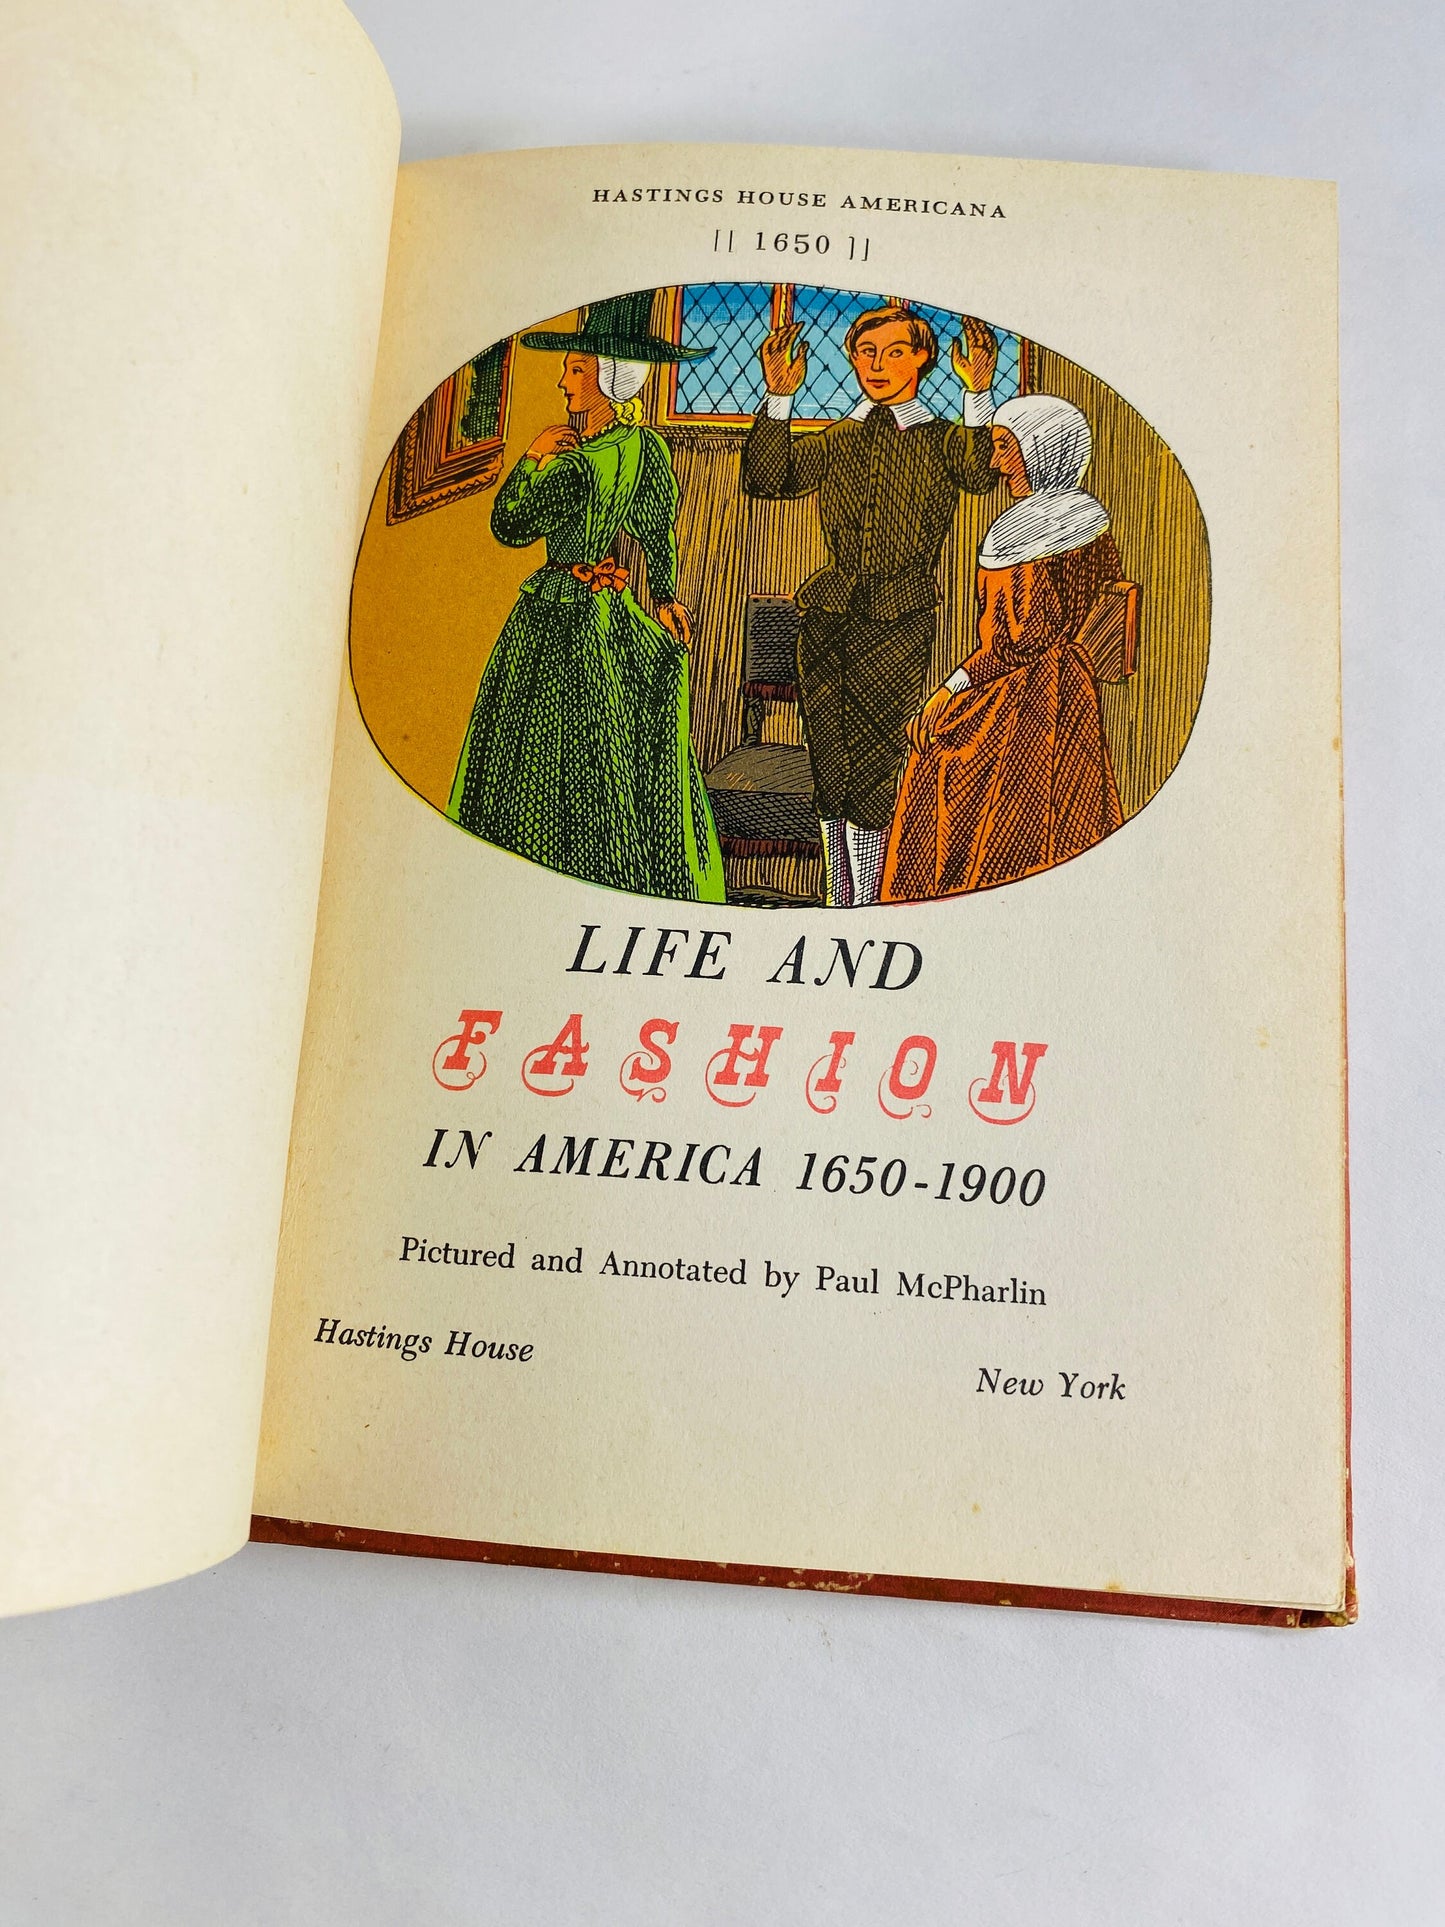 Life and Fashion in America 1650-1900 Costume vintage design book by Paul McPharlin circa 1946 Style fGothic Renaissance Elizabethan